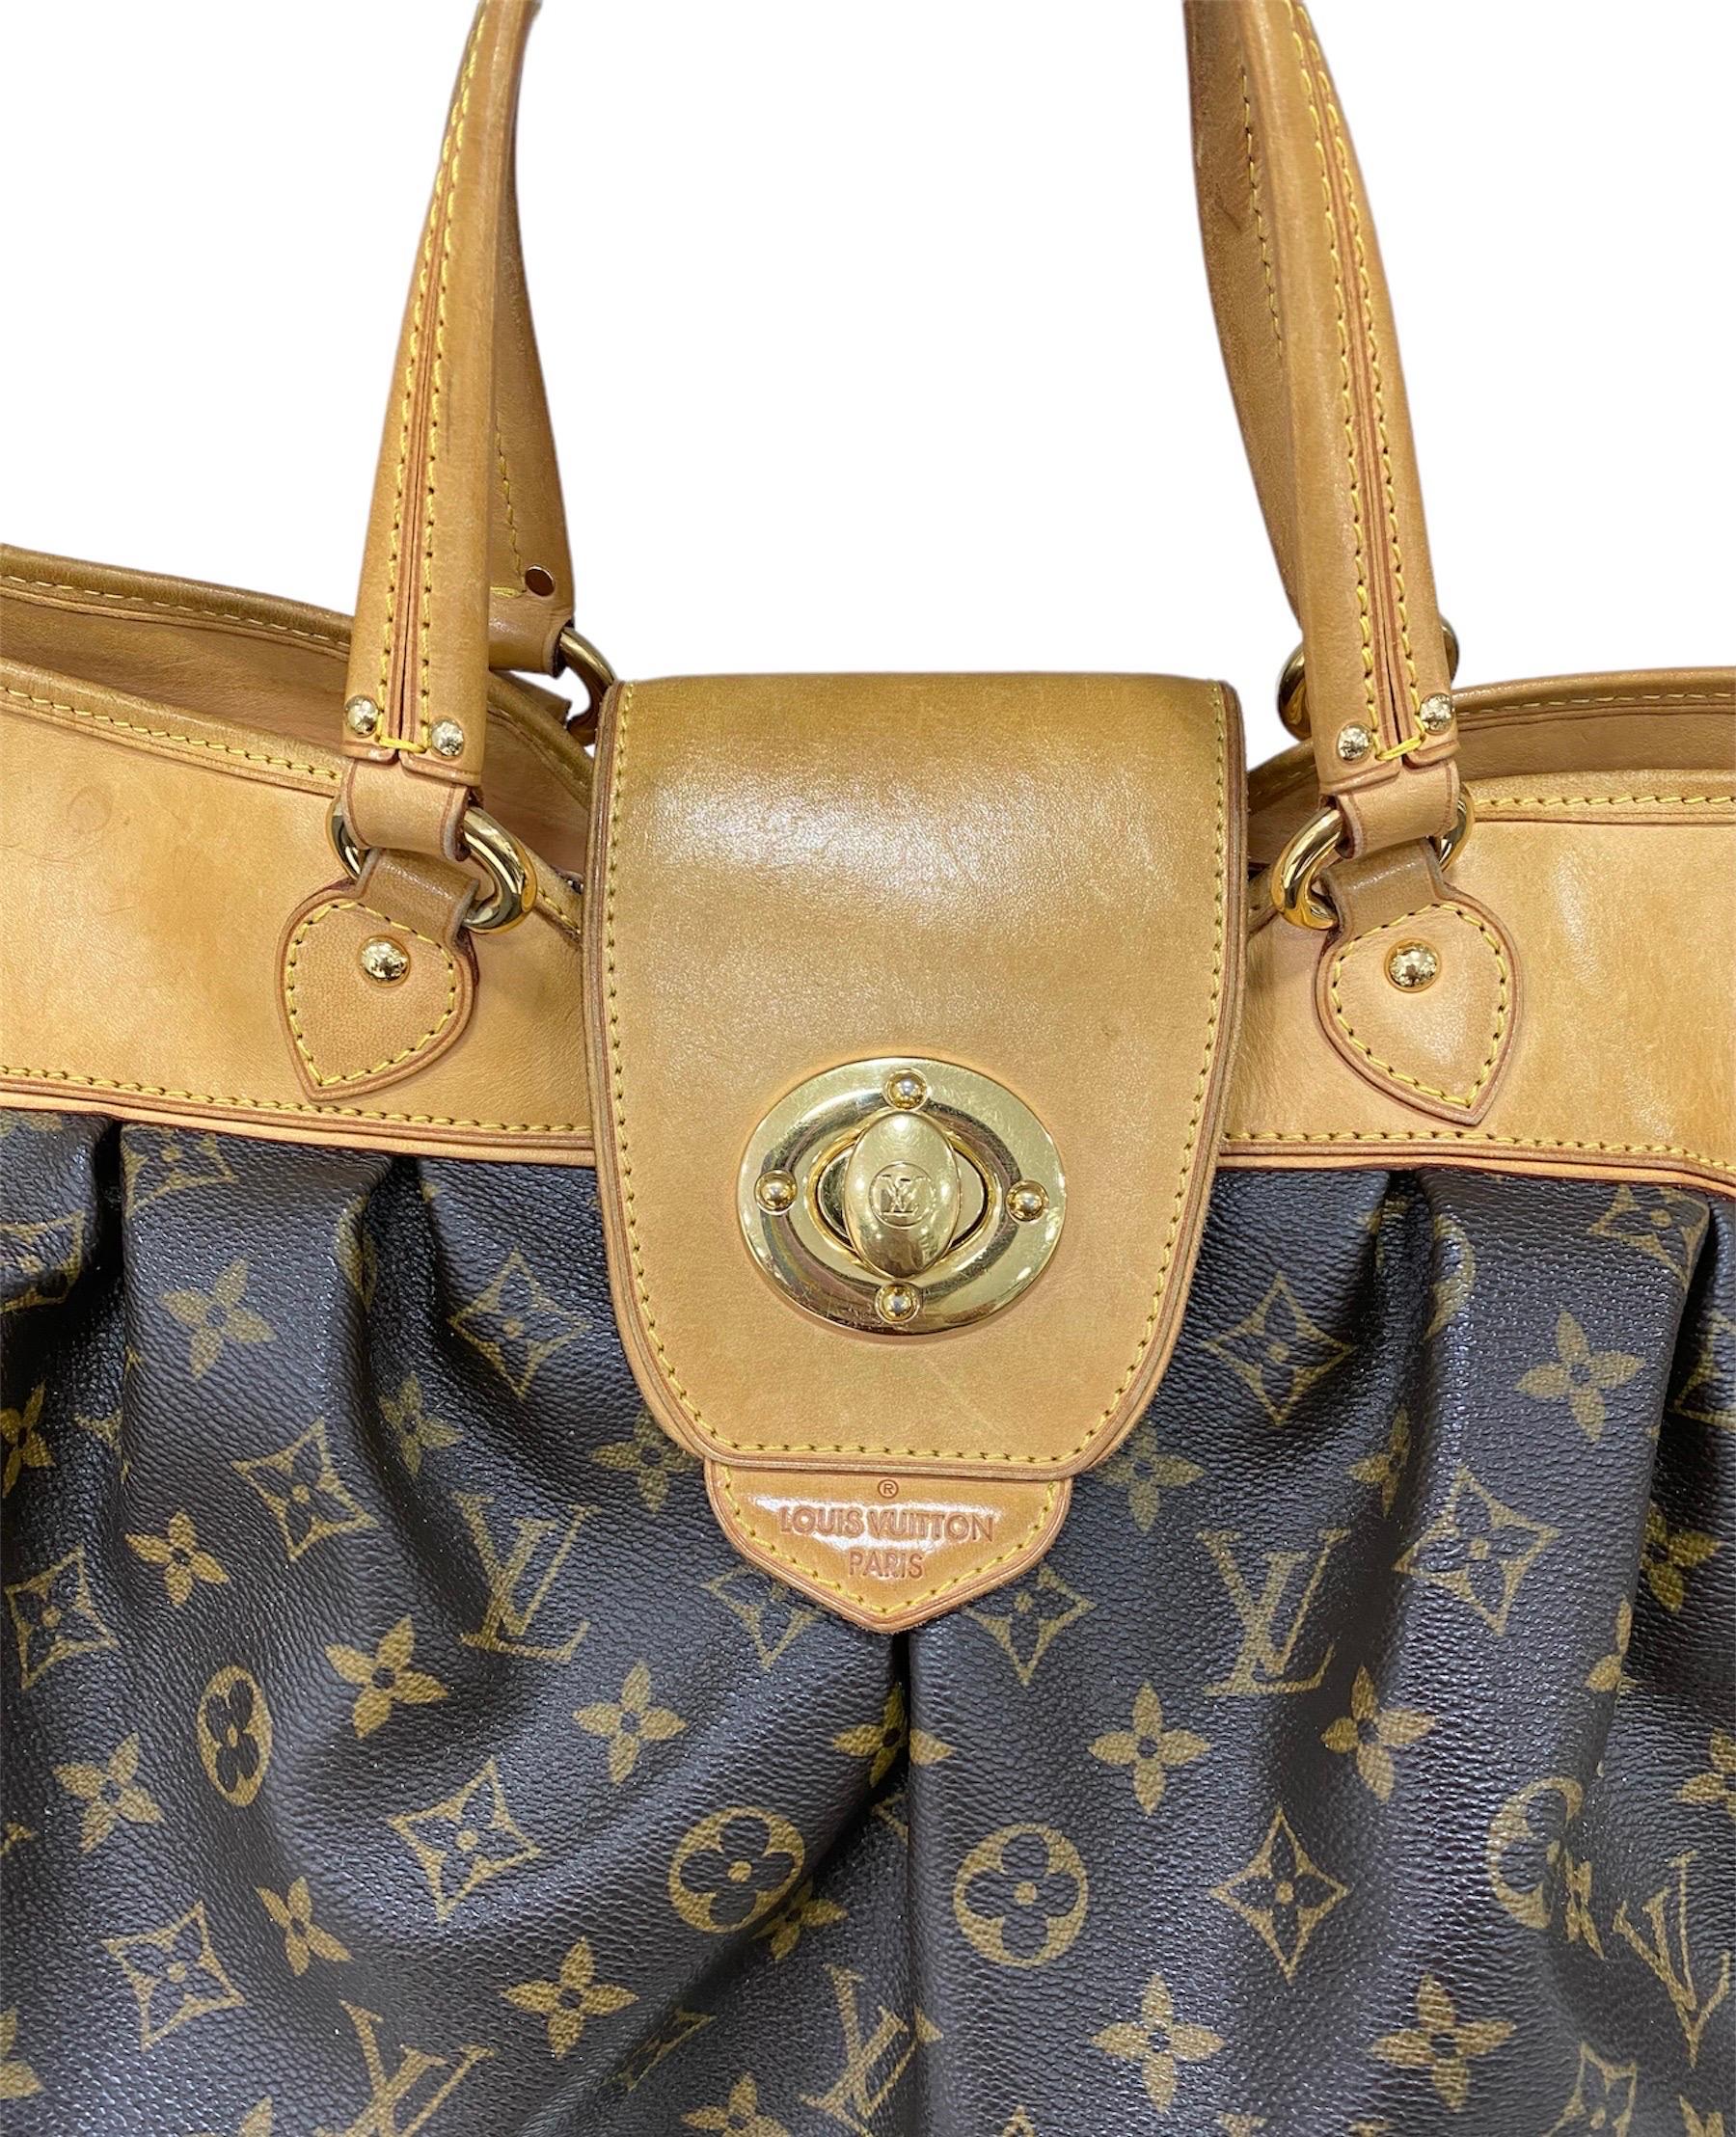 Louis Vuitton bag, Boetie model, GM size, made of brown monogram canvas with cowhide inserts.

Equipped with an interlocking flap closure, internally lined in beige suede, very roomy.

Equipped with double cowhide handle and a removable and